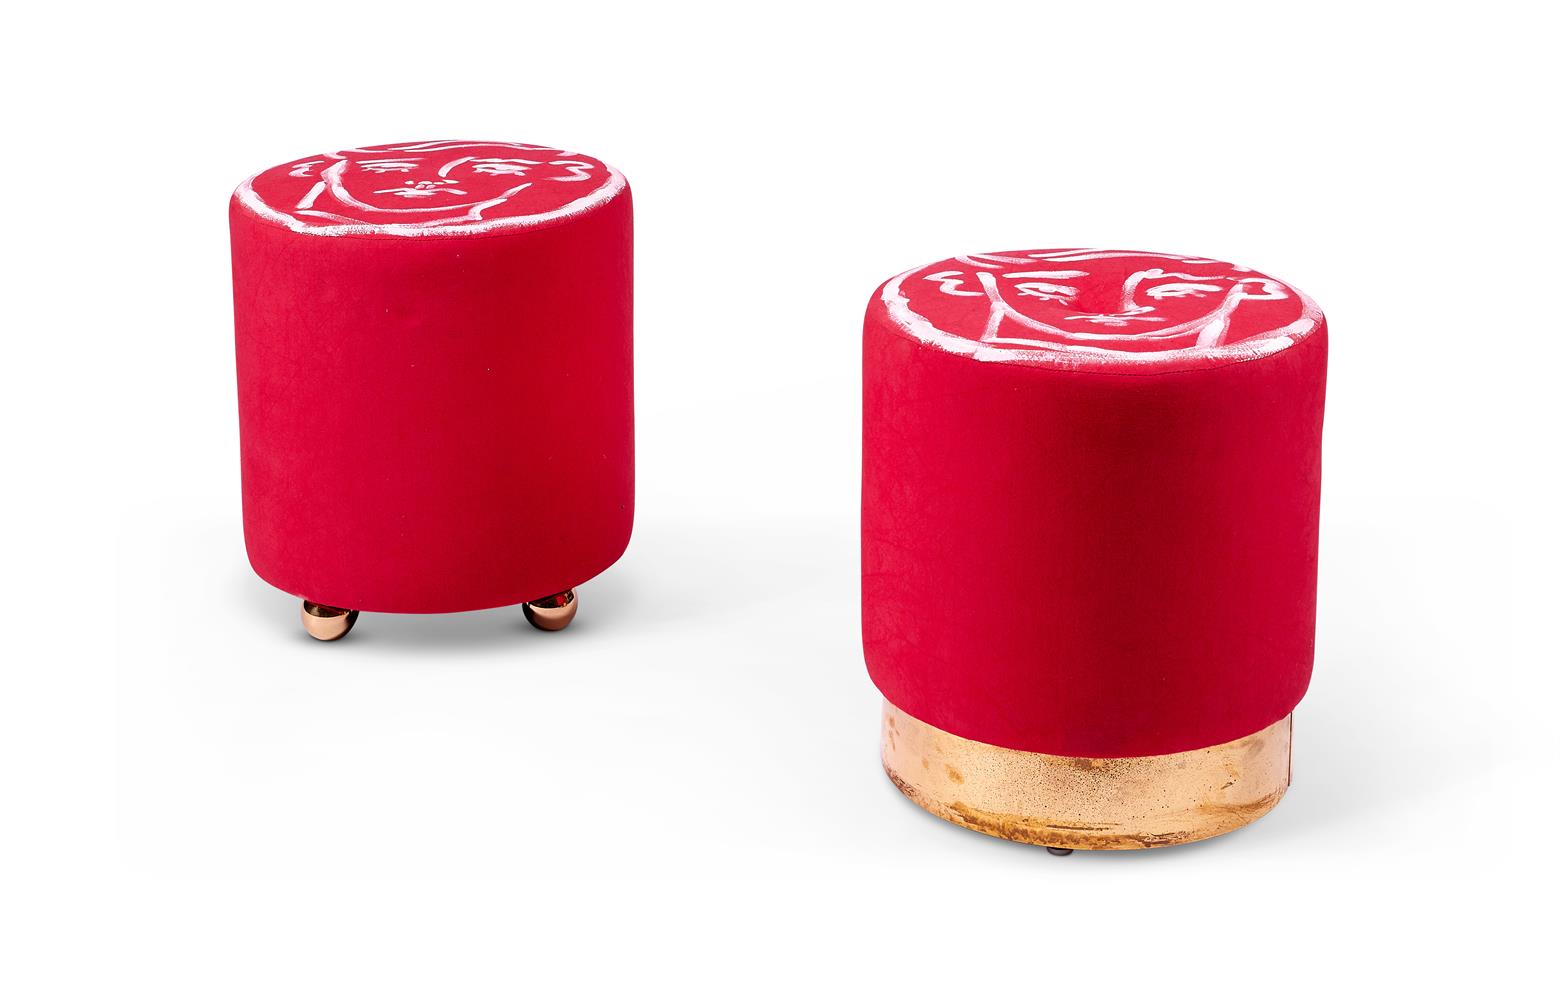 A PAIR OF UPHOLSTERED AND HAND PAINTED STOOLS BY LUKE EDWARD HALL, 2017